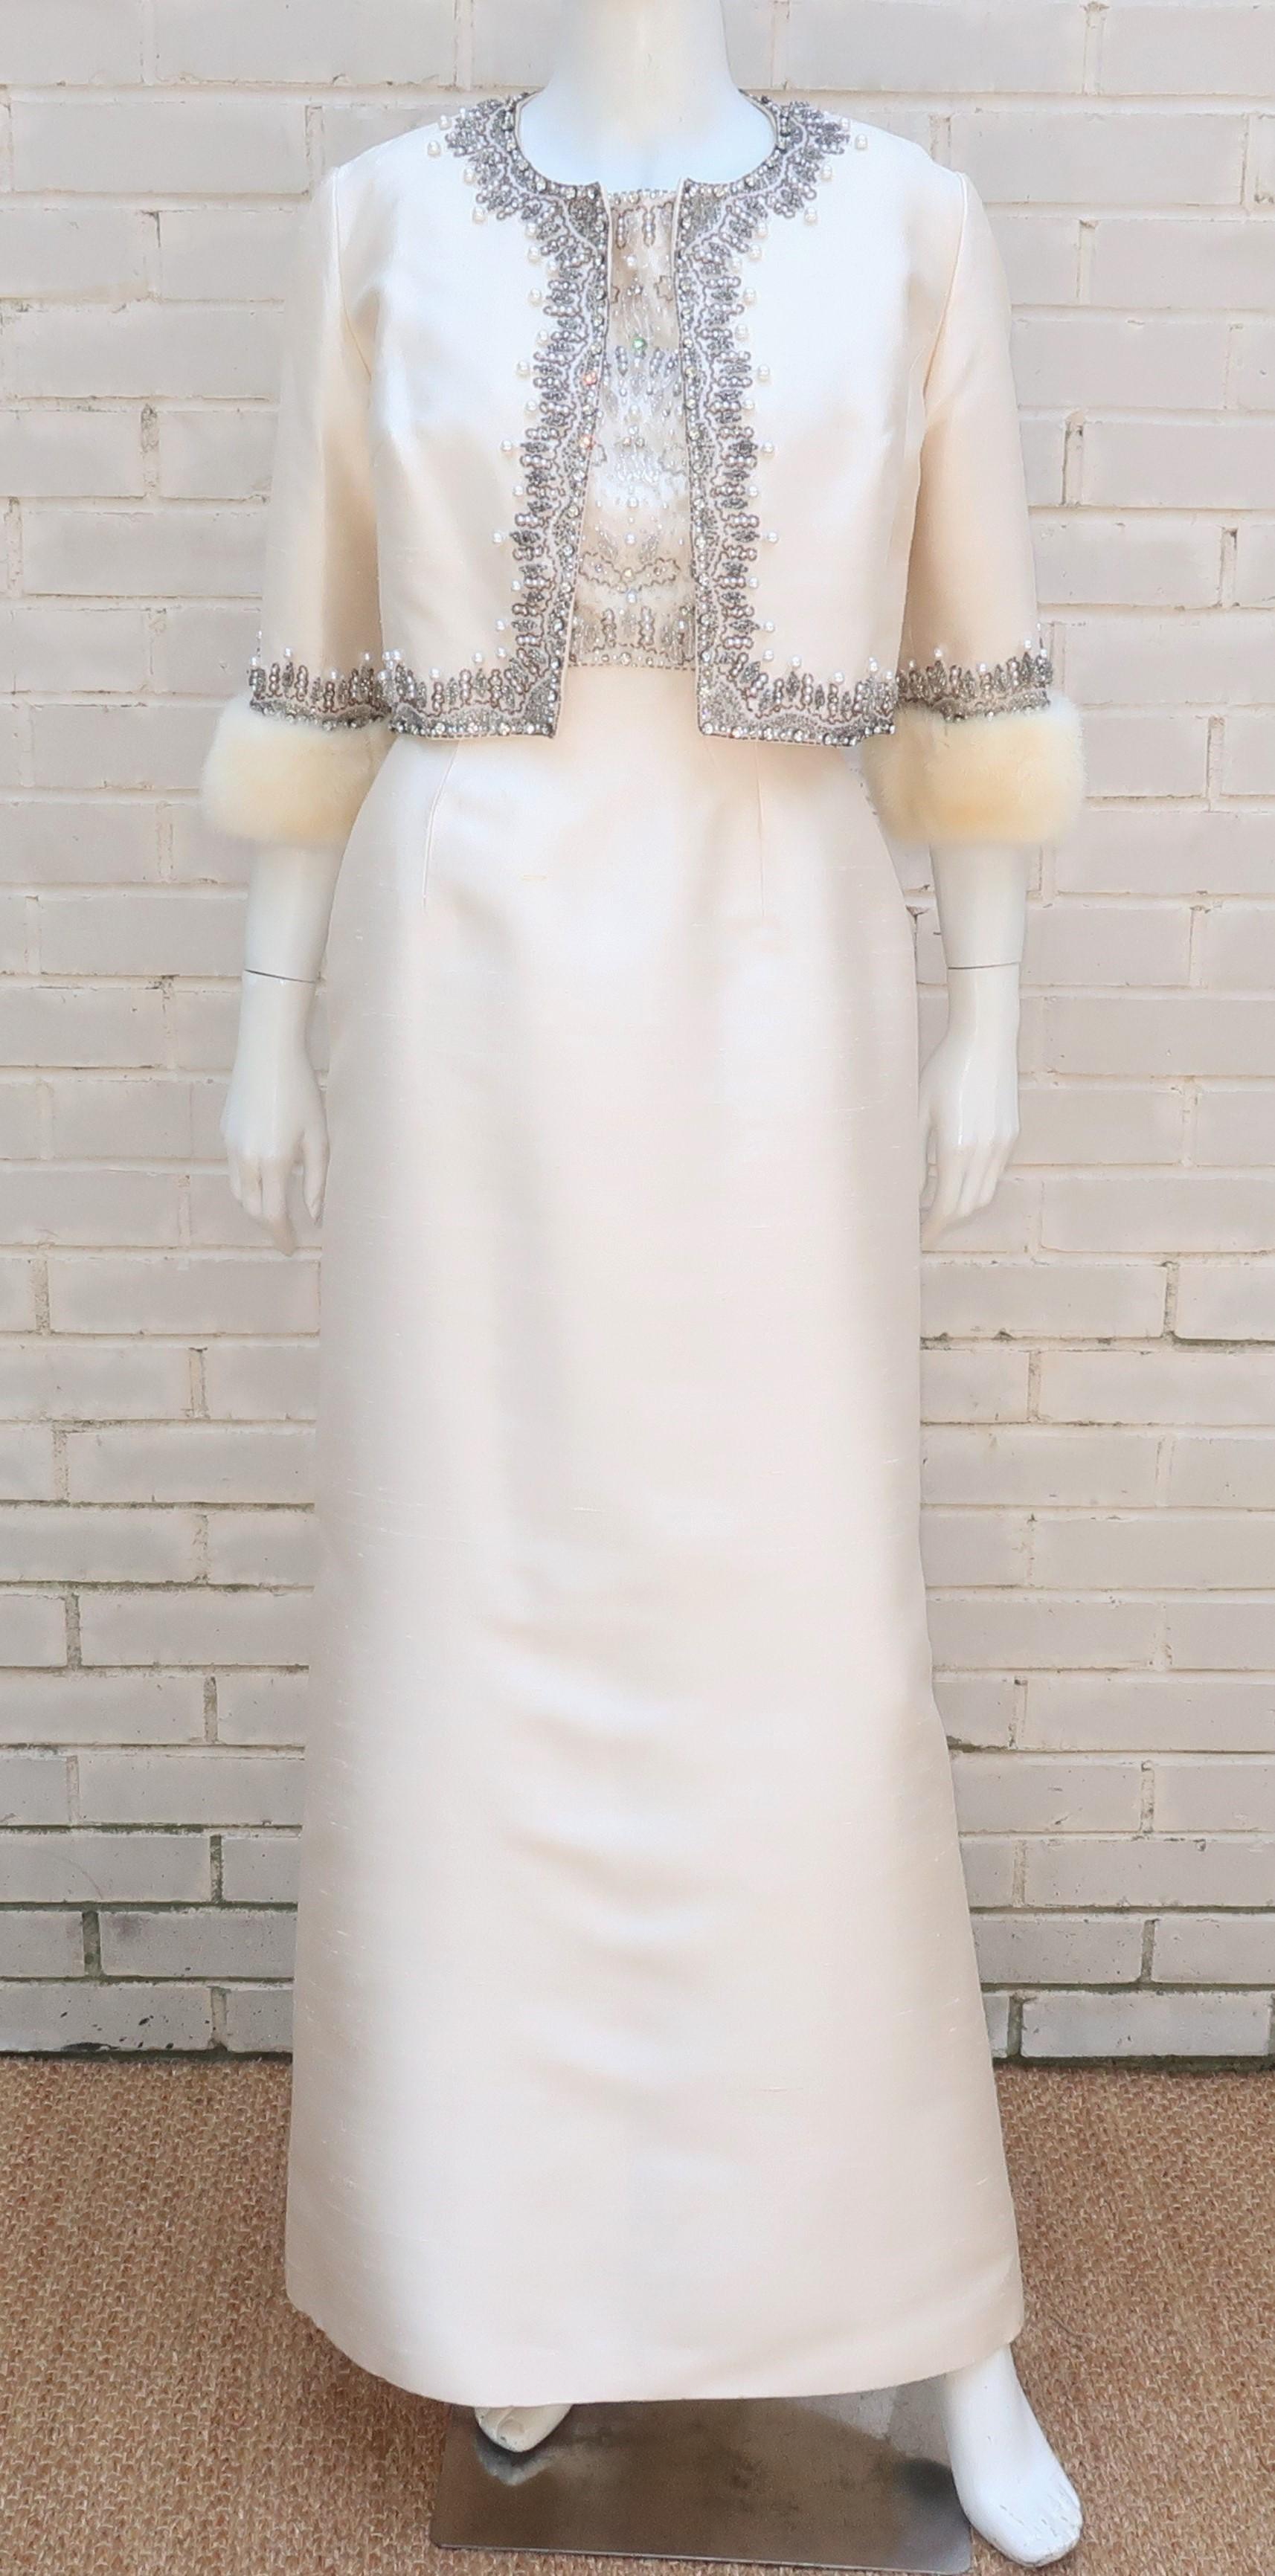 Regal 1960's white silk dupioni evening dress with ornately beaded bodice and coordinating cropped jacket trimmed at the cuffs in mink fur.  The sleeveless dress zips and hooks at the scooped neck back with a modified empire waist bodice embellished